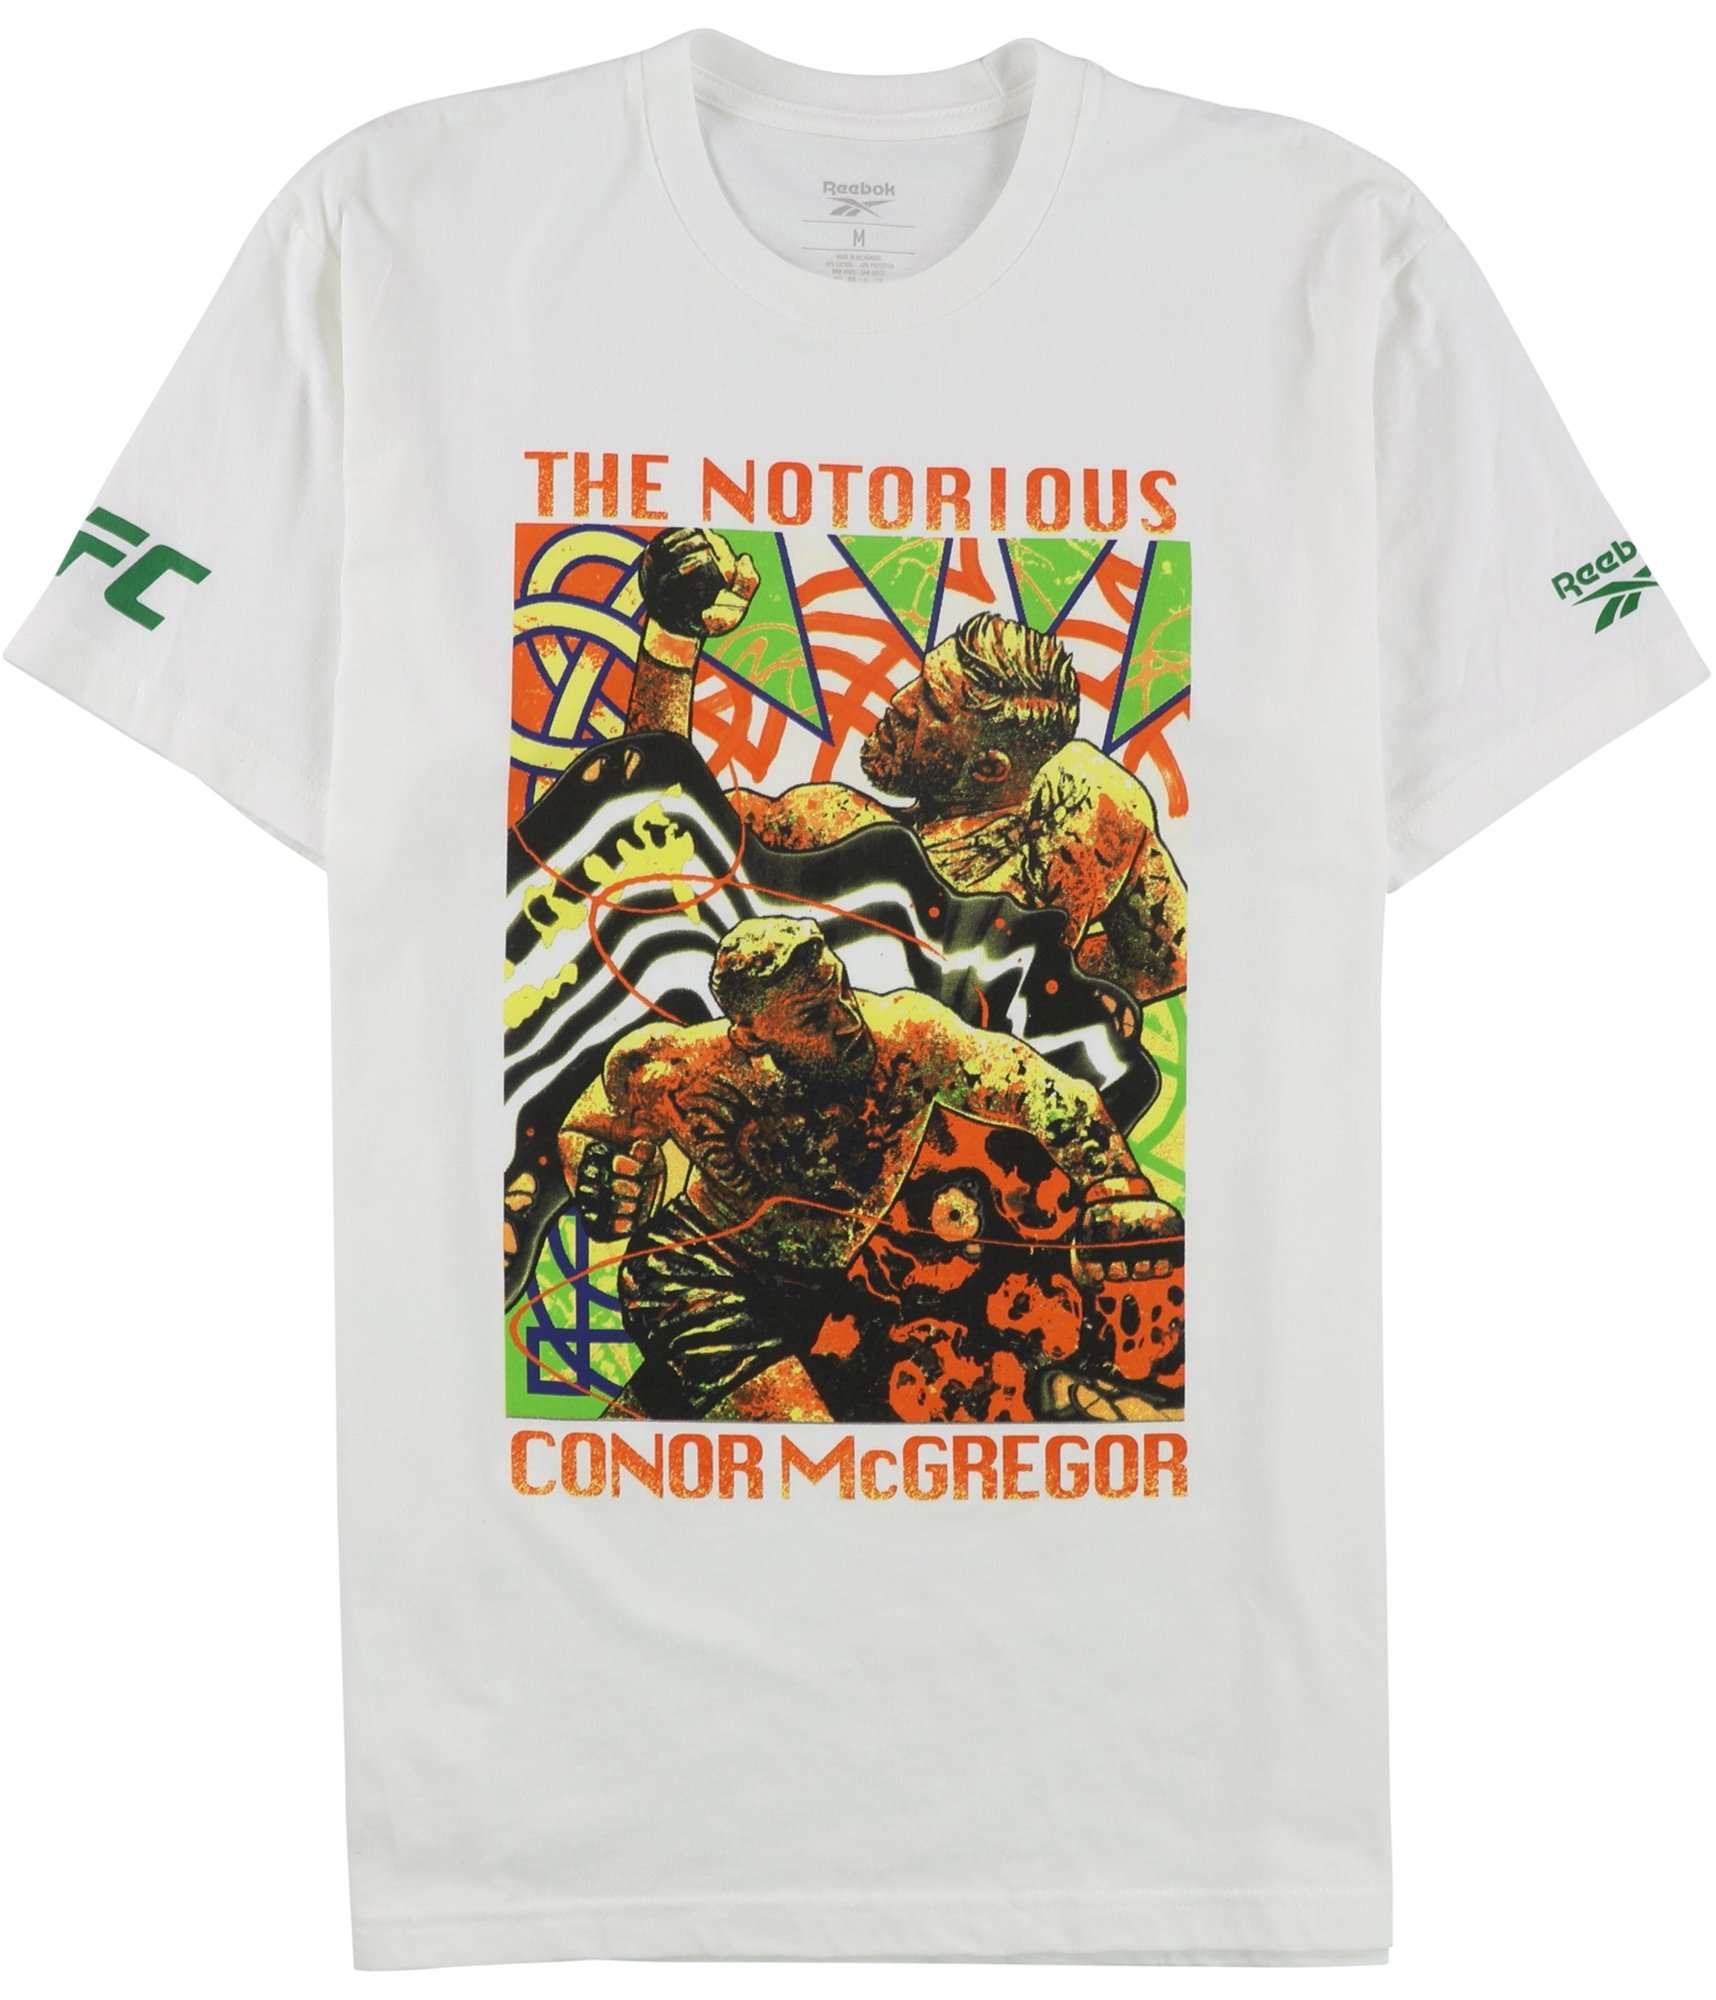 Buy a Mens Reebok Notorious Conor McGregor Graphic T-Shirt Online TagsWeekly.com